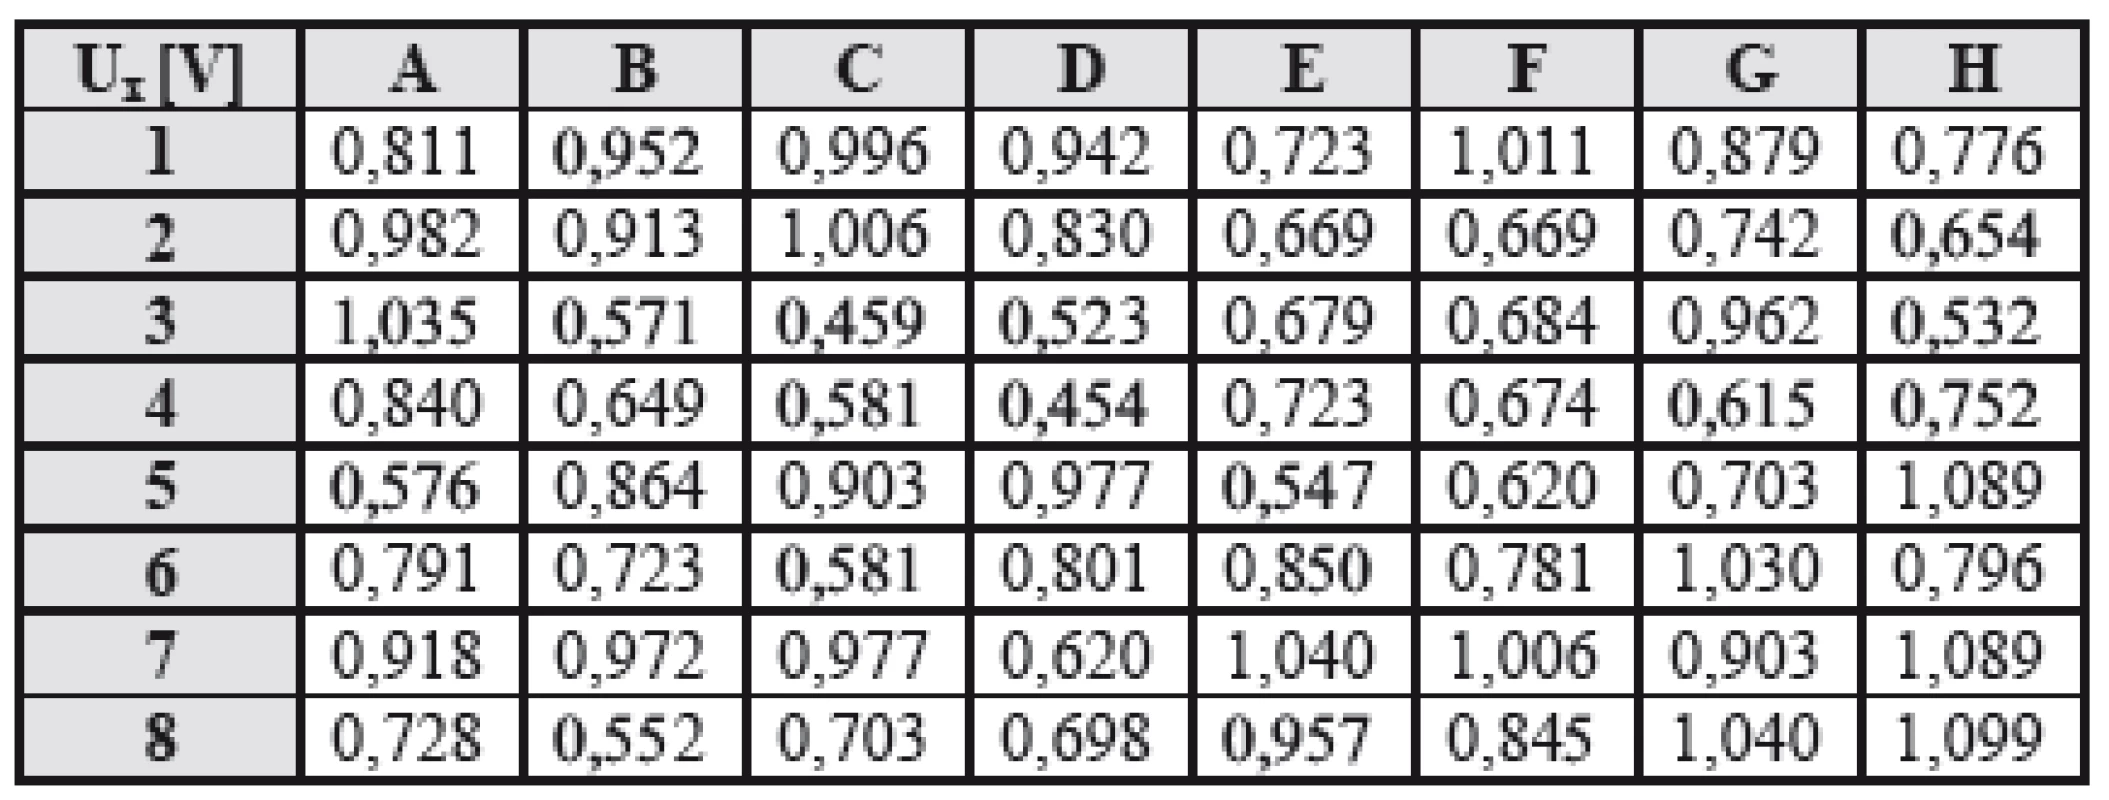 Table of measured voltages Ux on electrodes, at the beginning of measurement, time t=0 minutes (8x8 electrodes in matrix, in rows and columns).